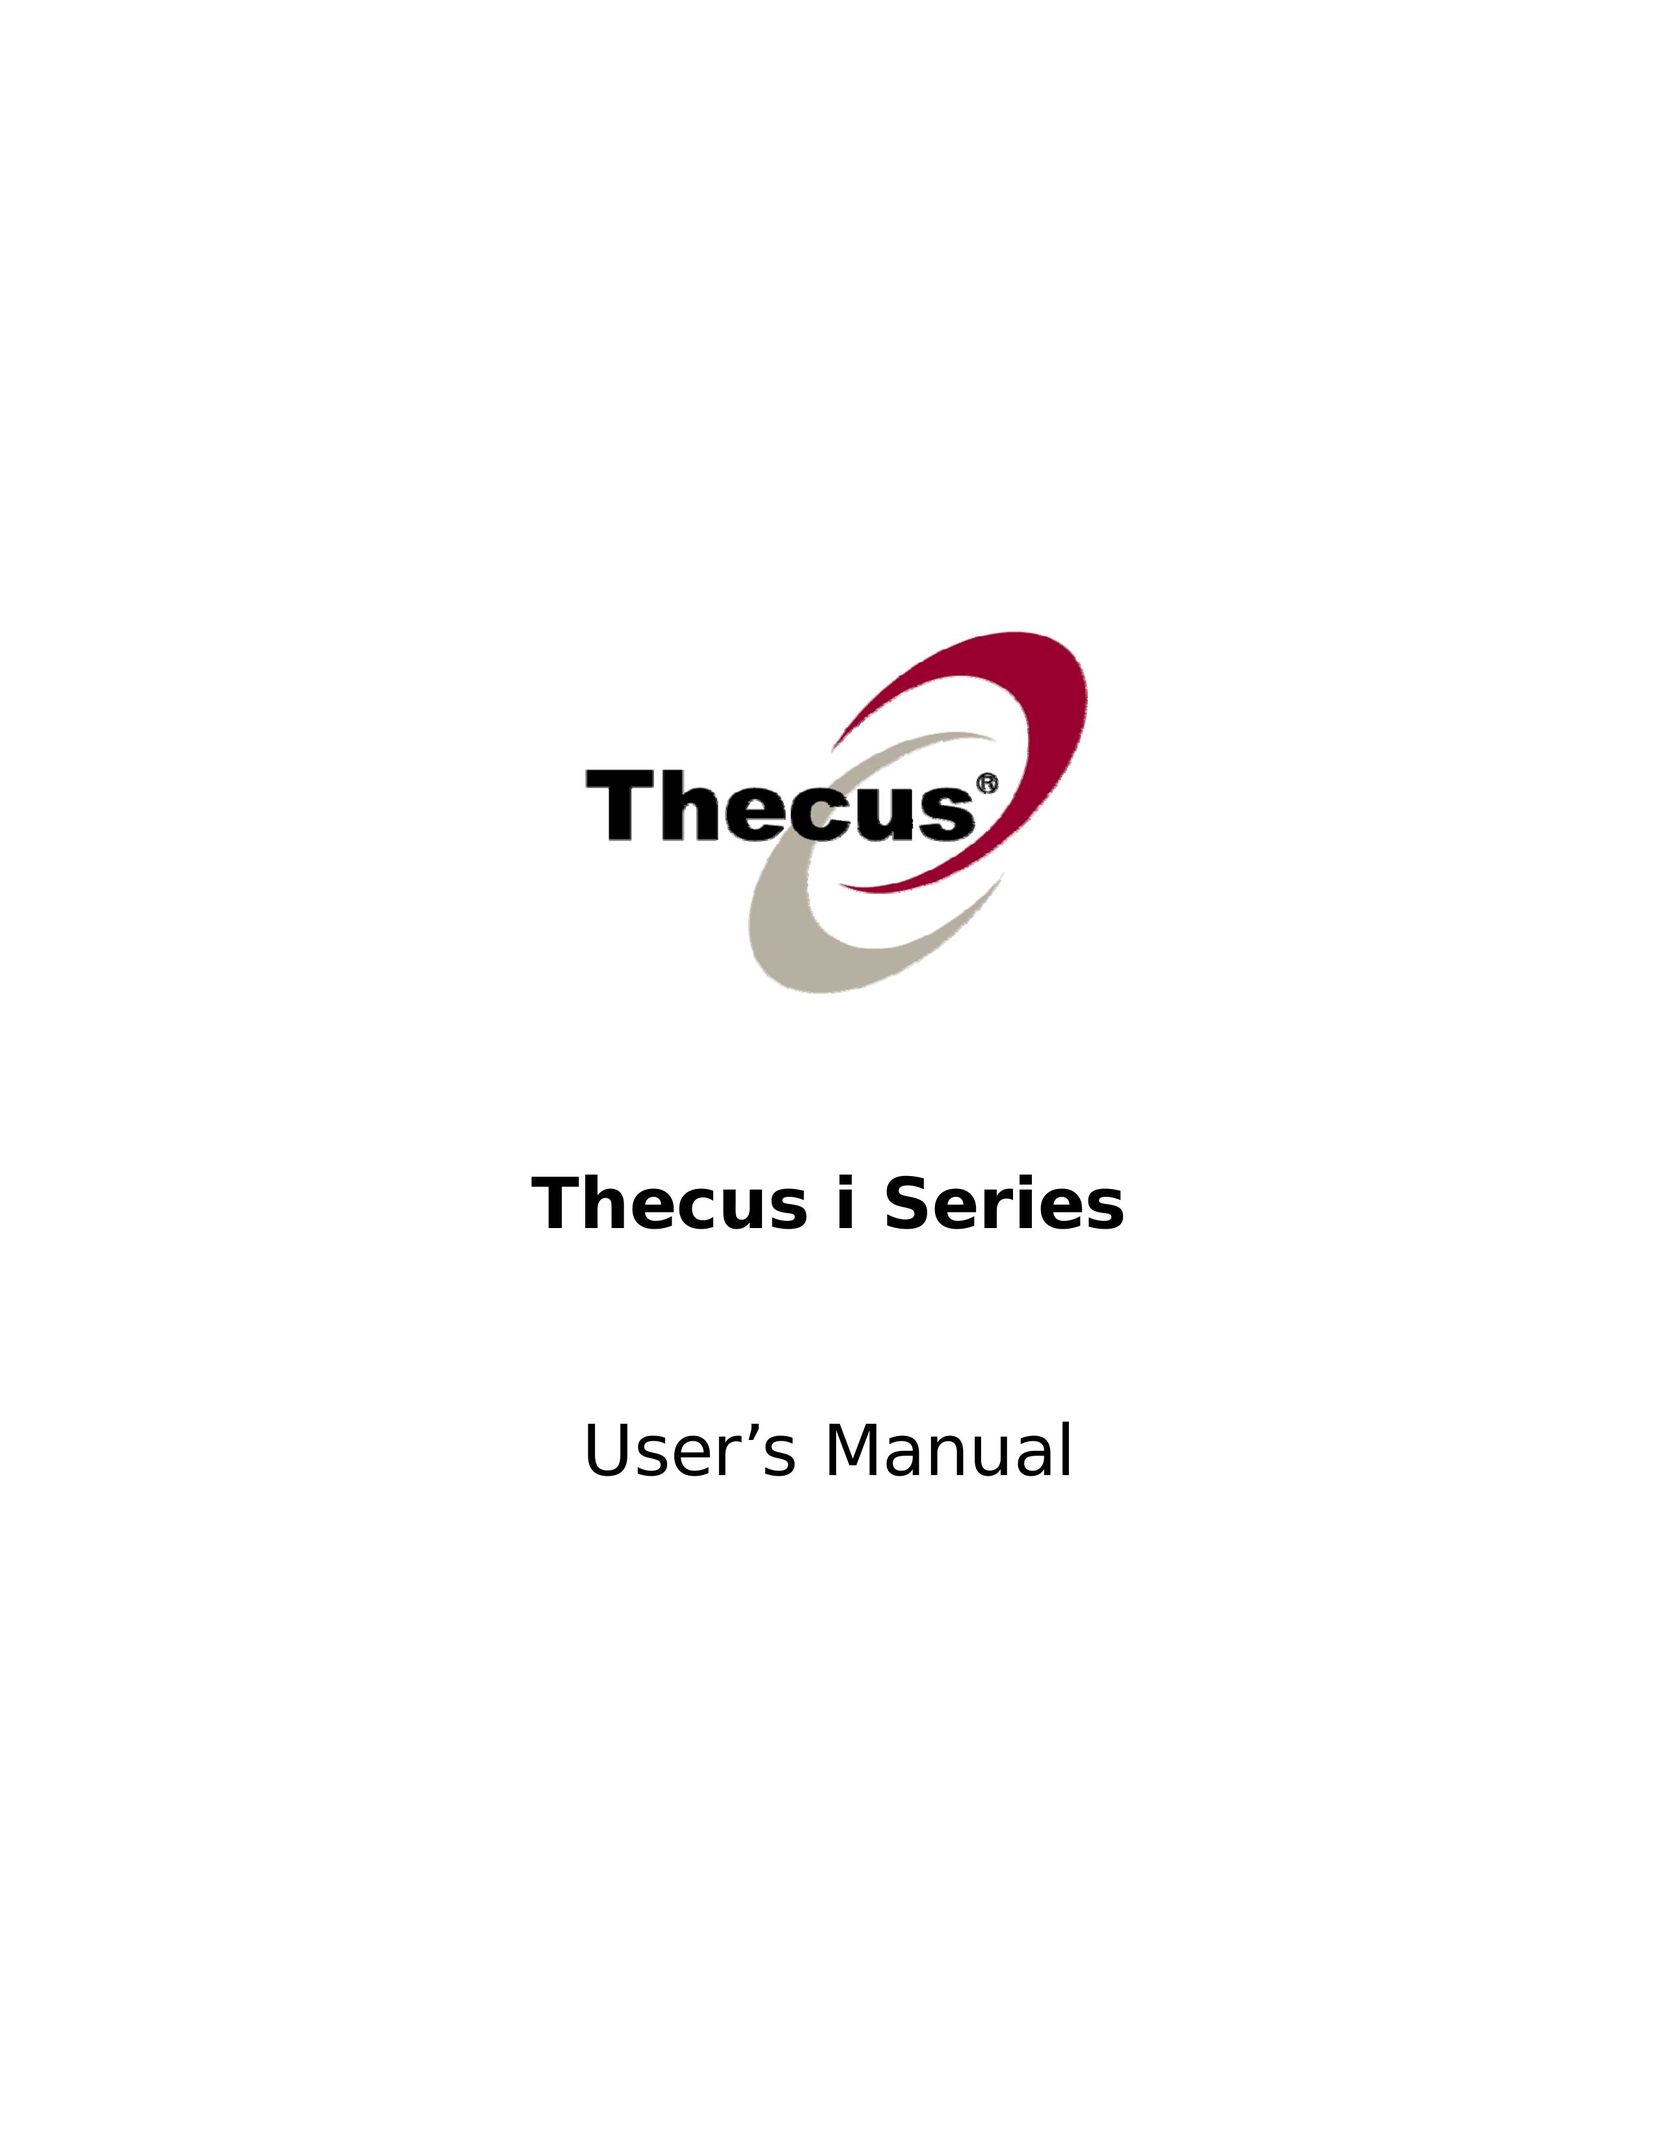 Thecus Technology i Series Network Card User Manual